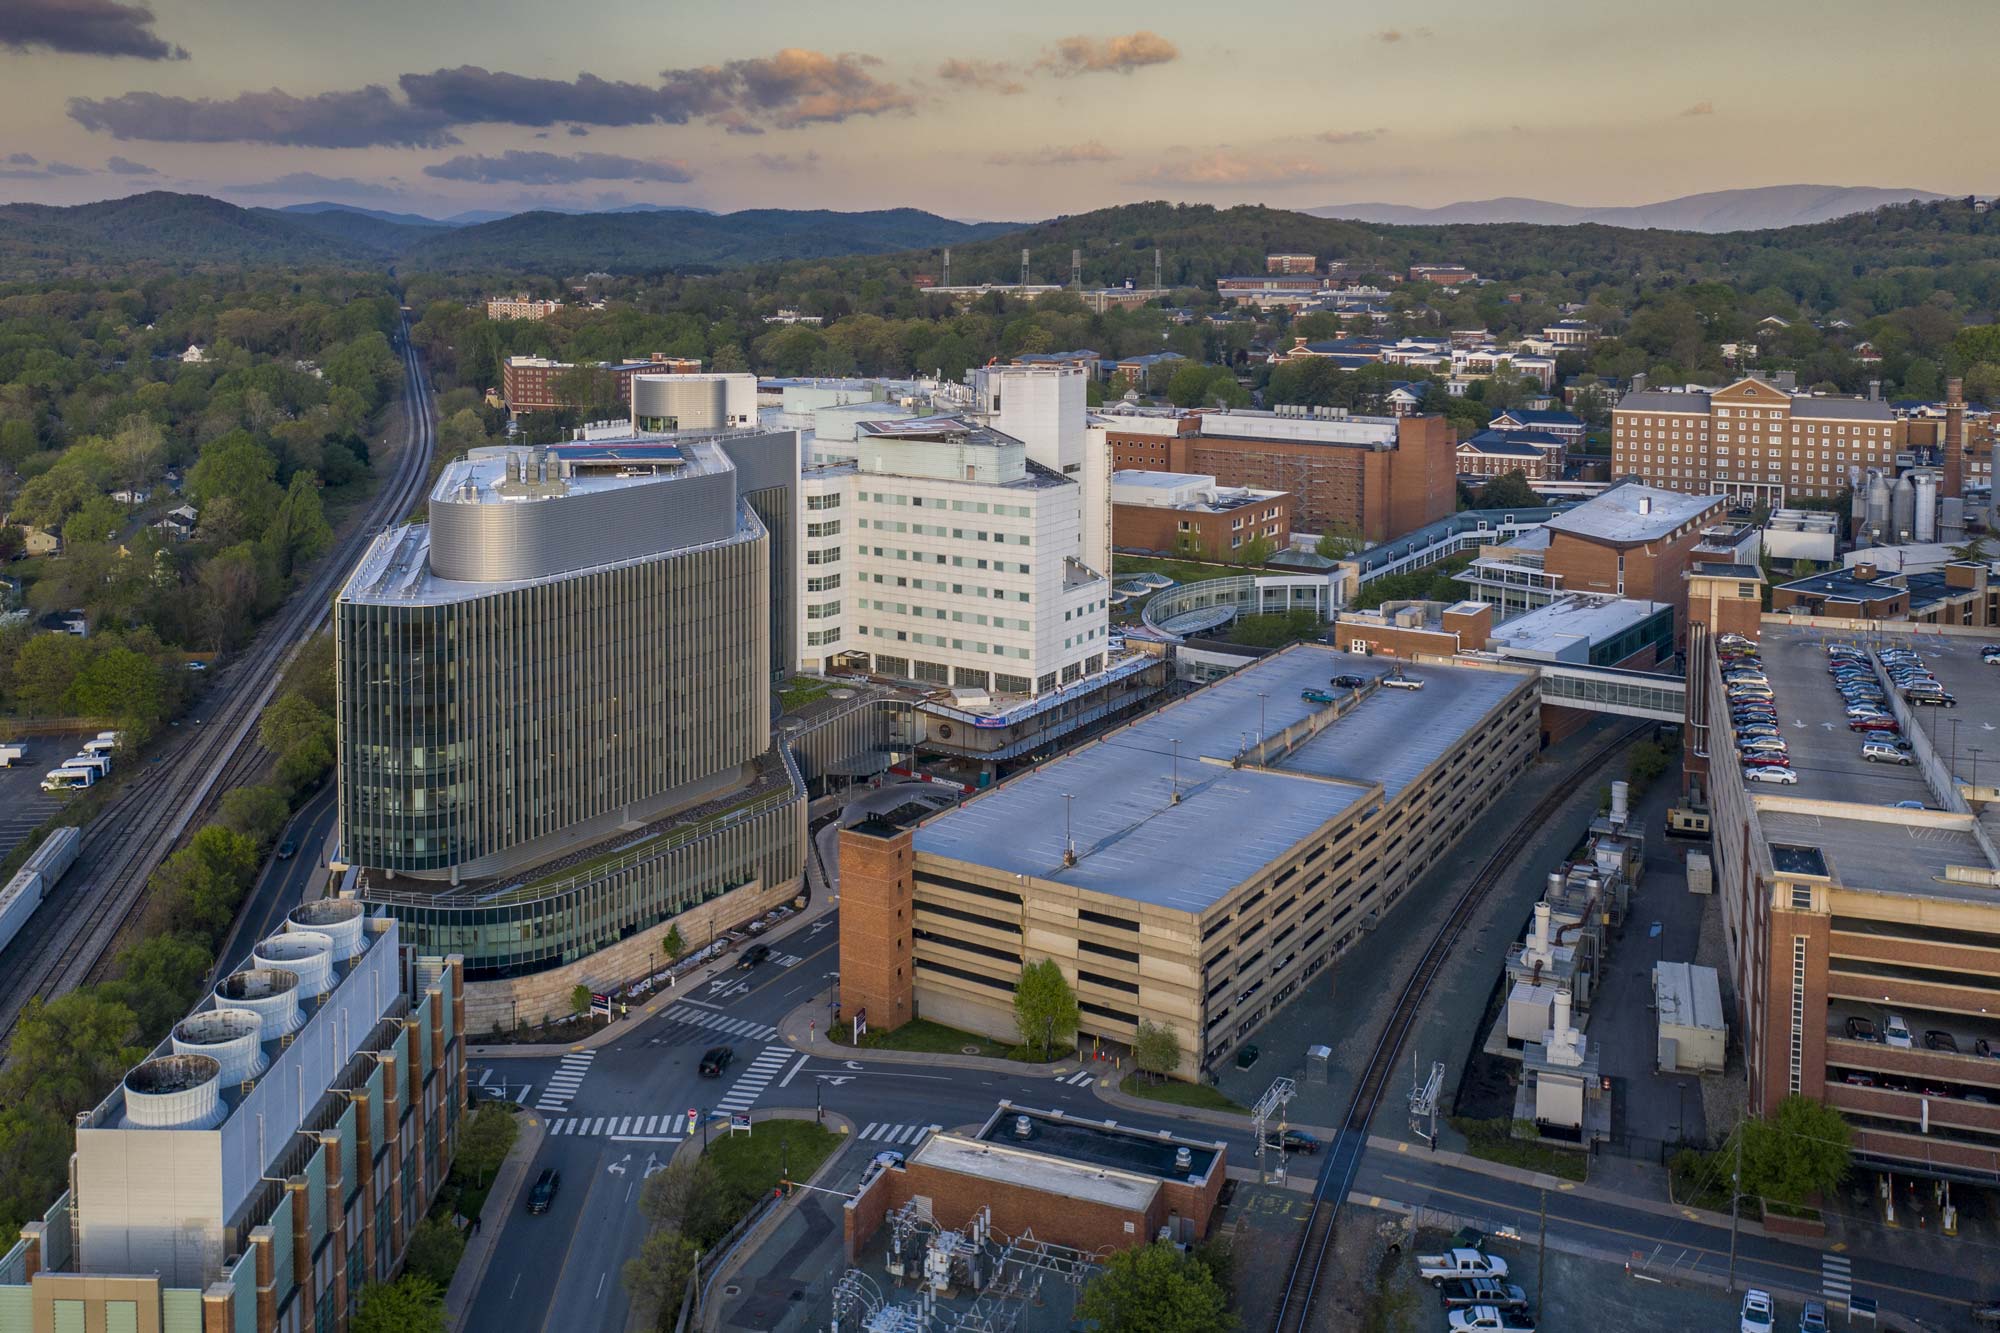 Aerial view of the UVA Medical Center